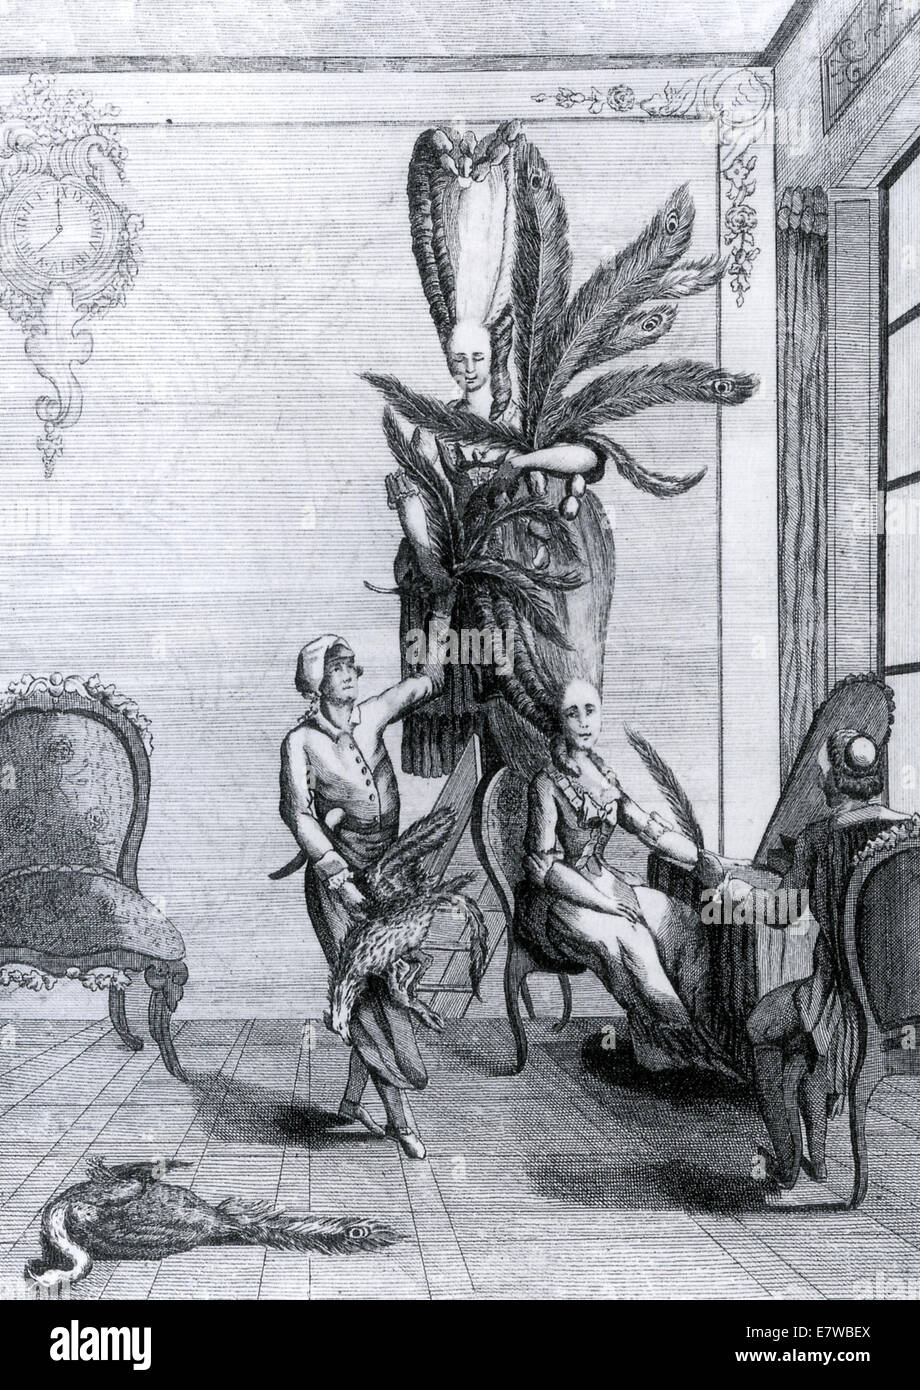 TOILETTE DE LA DUCHESS DES PLUMES French engraving about 1775 satirising the fashion for towering hairstyles - see Description Stock Photo